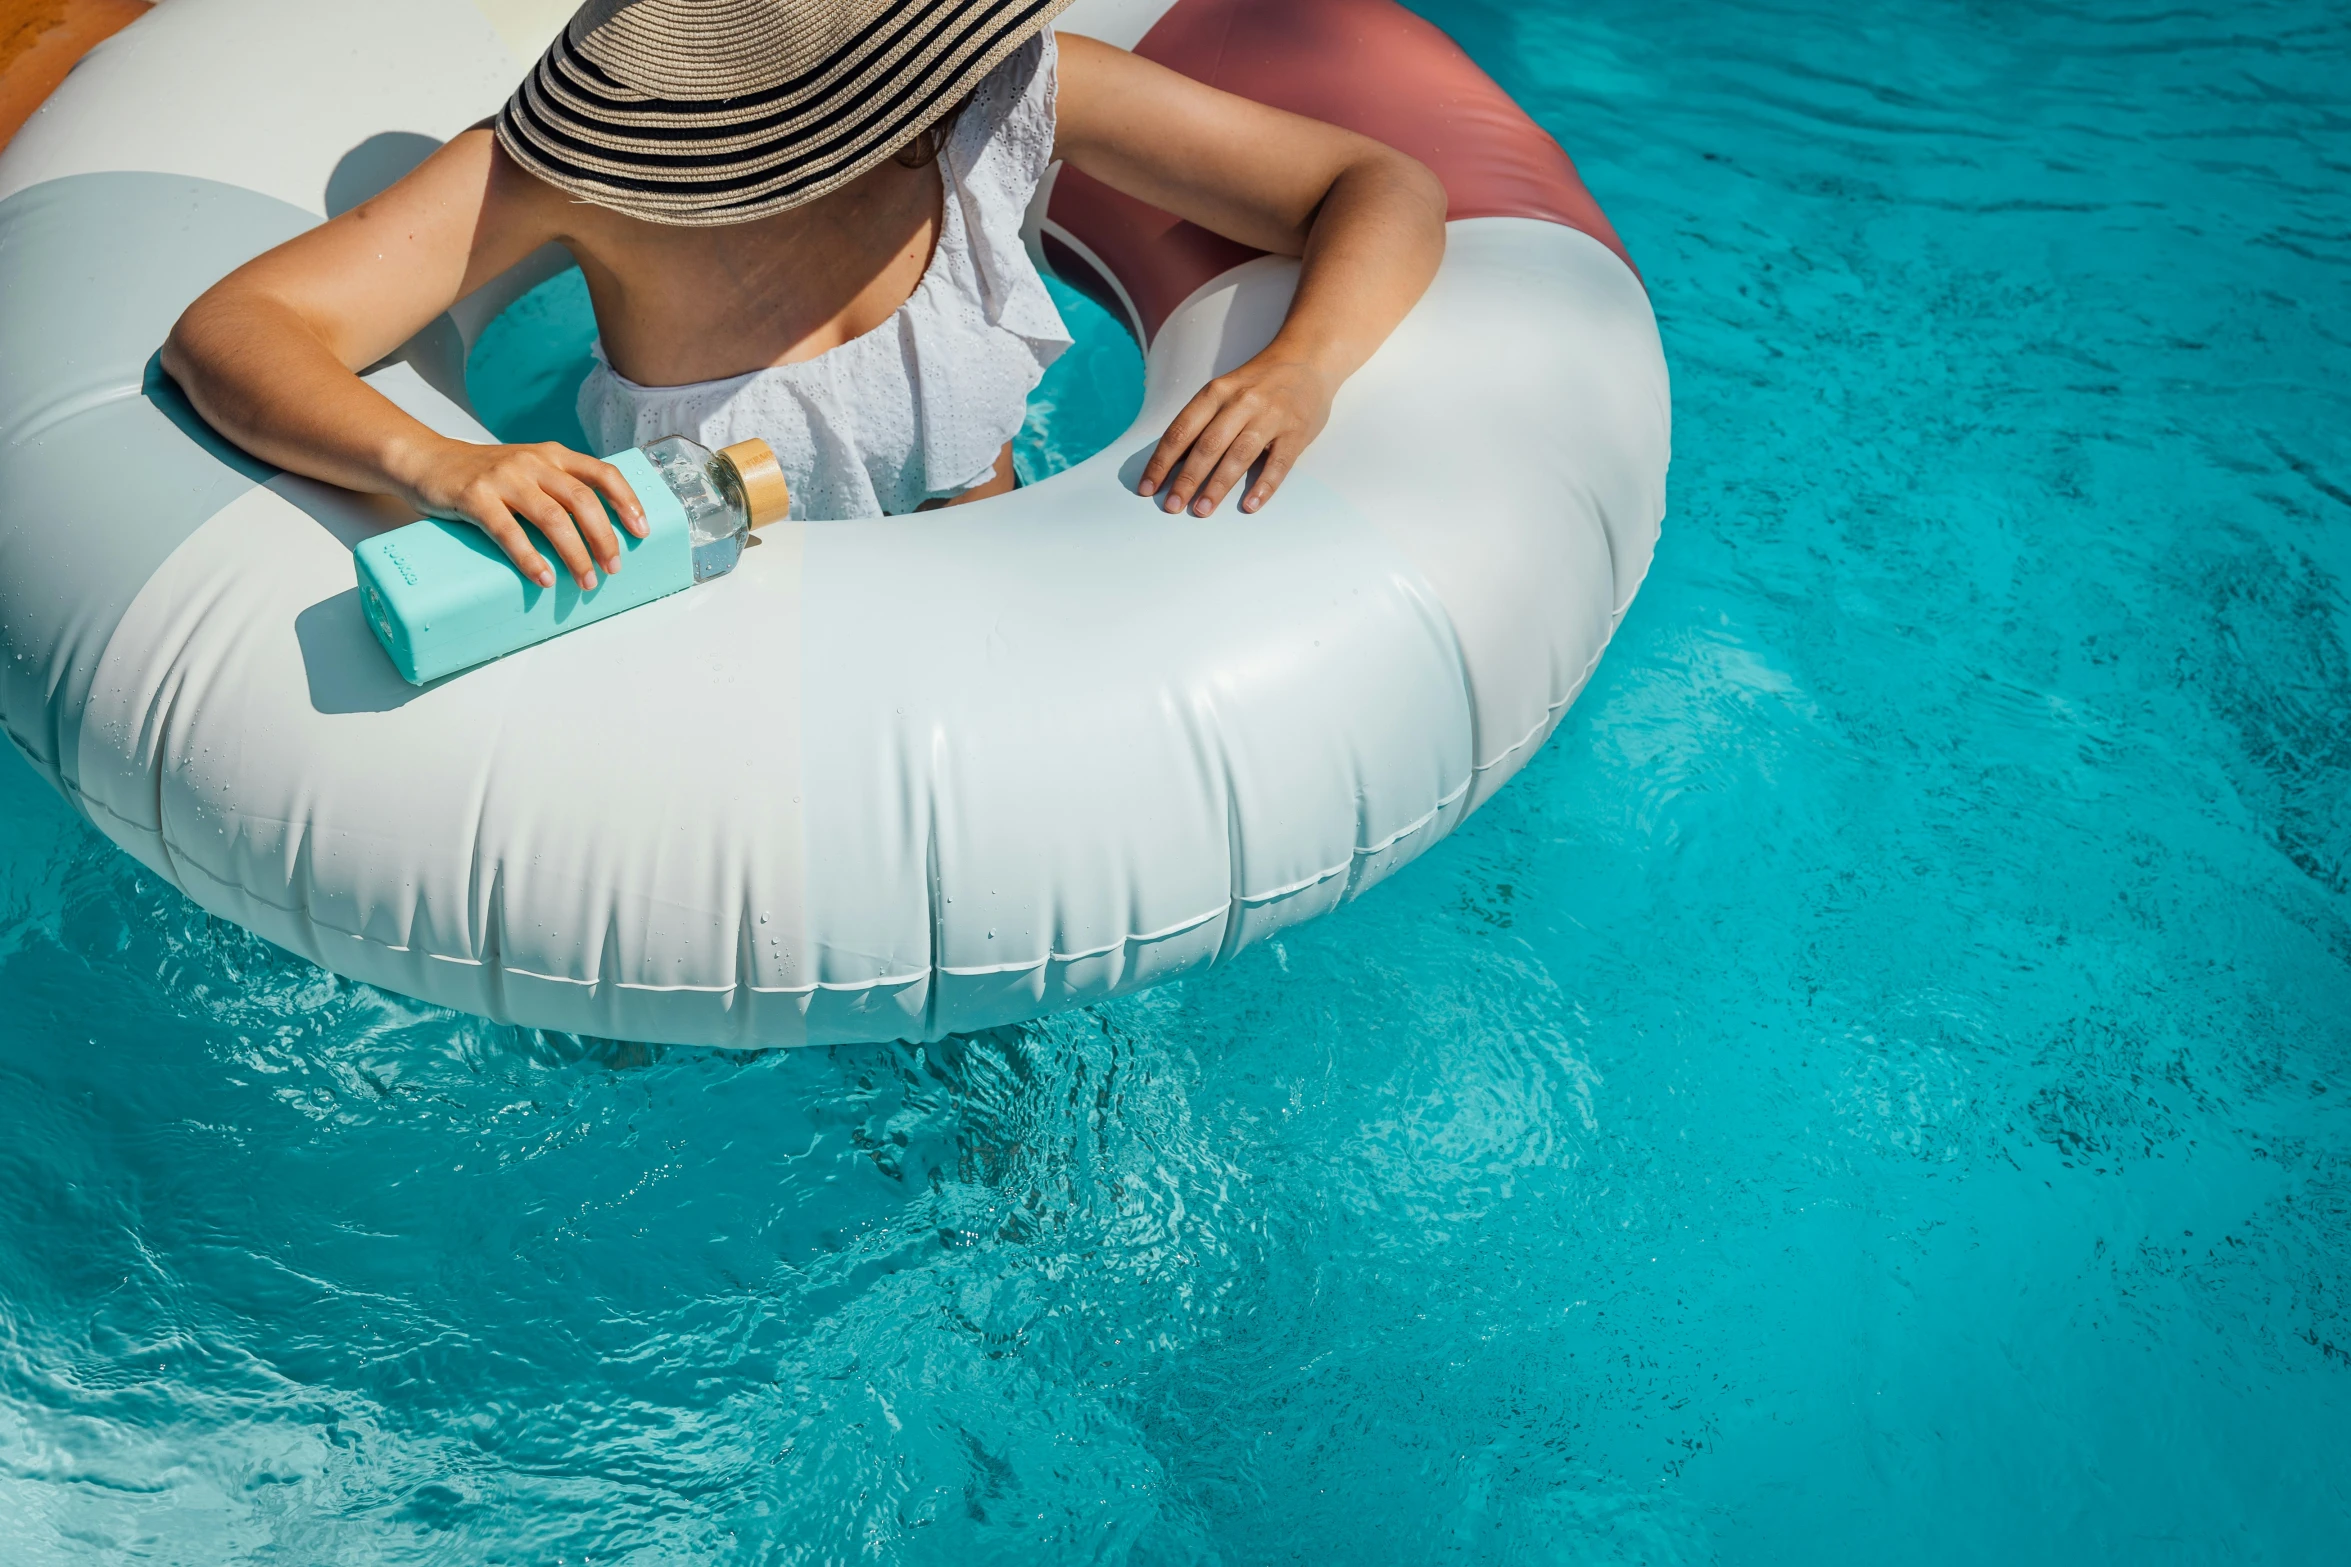 the woman is sitting on an inflatable raft in the pool